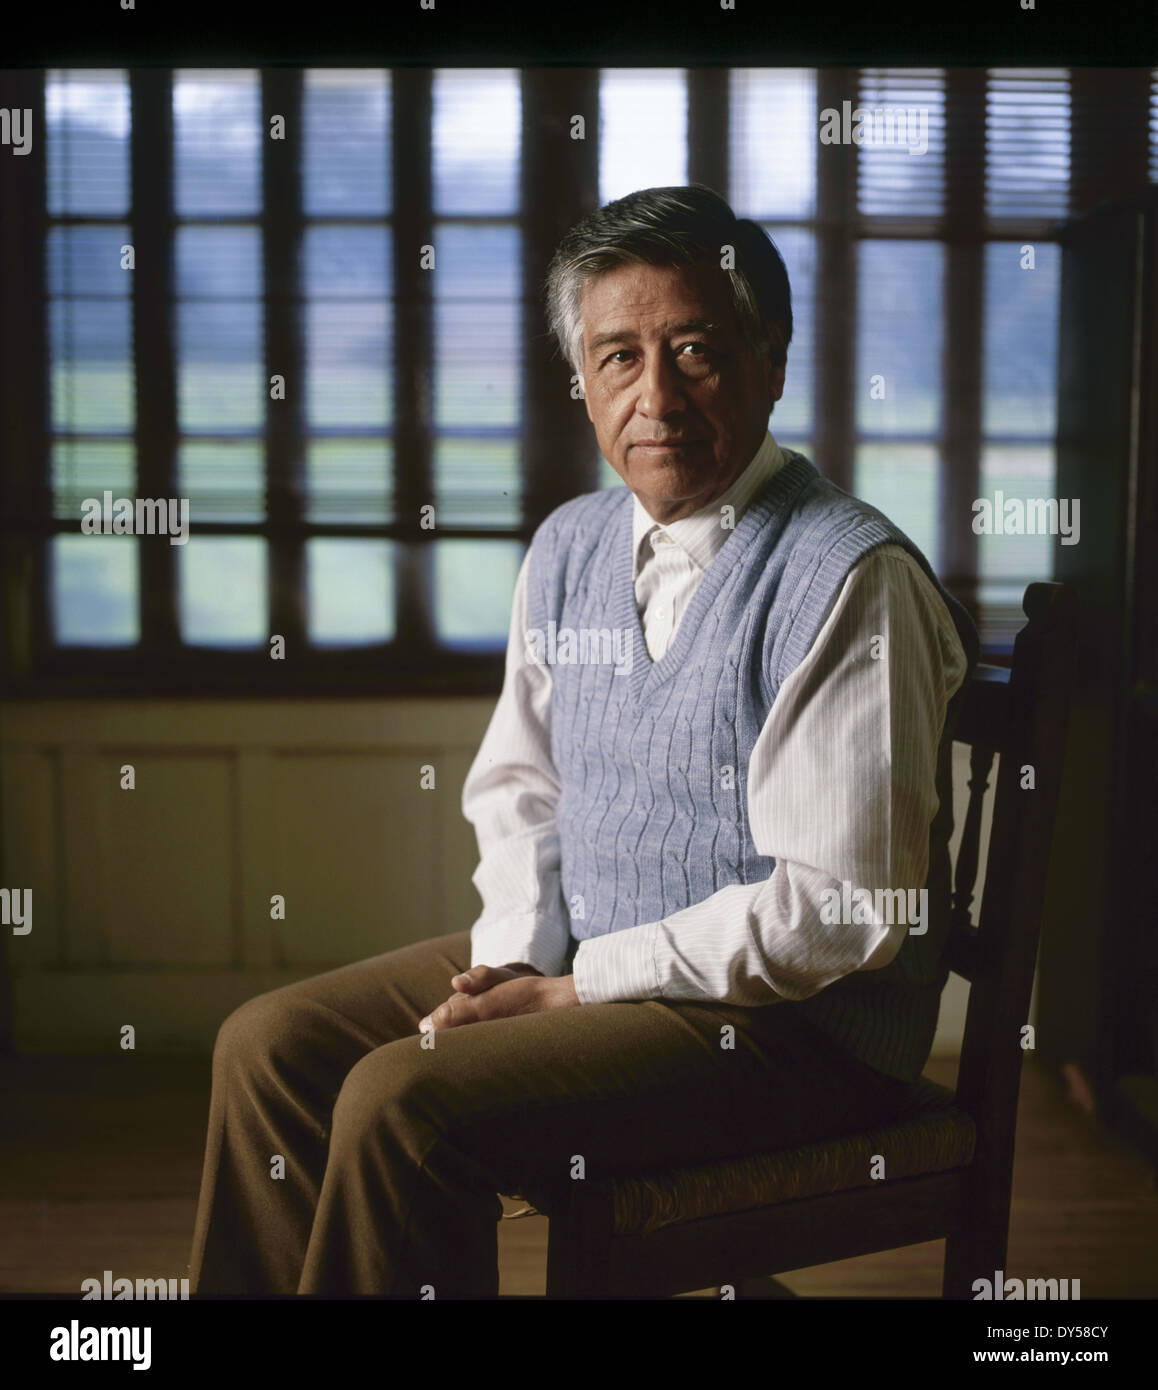 April 3, 1990 - Bakersfield, CA, USA - A American farm worker, labor leader and civil rights activist, who, with Dolores Huerta, co-founded the National Farm Workers Association. Photographed at the Villa La Paz Conference & Education Center (Credit Image: © Mark Richards/ZUMAPRESS.com) Stock Photo